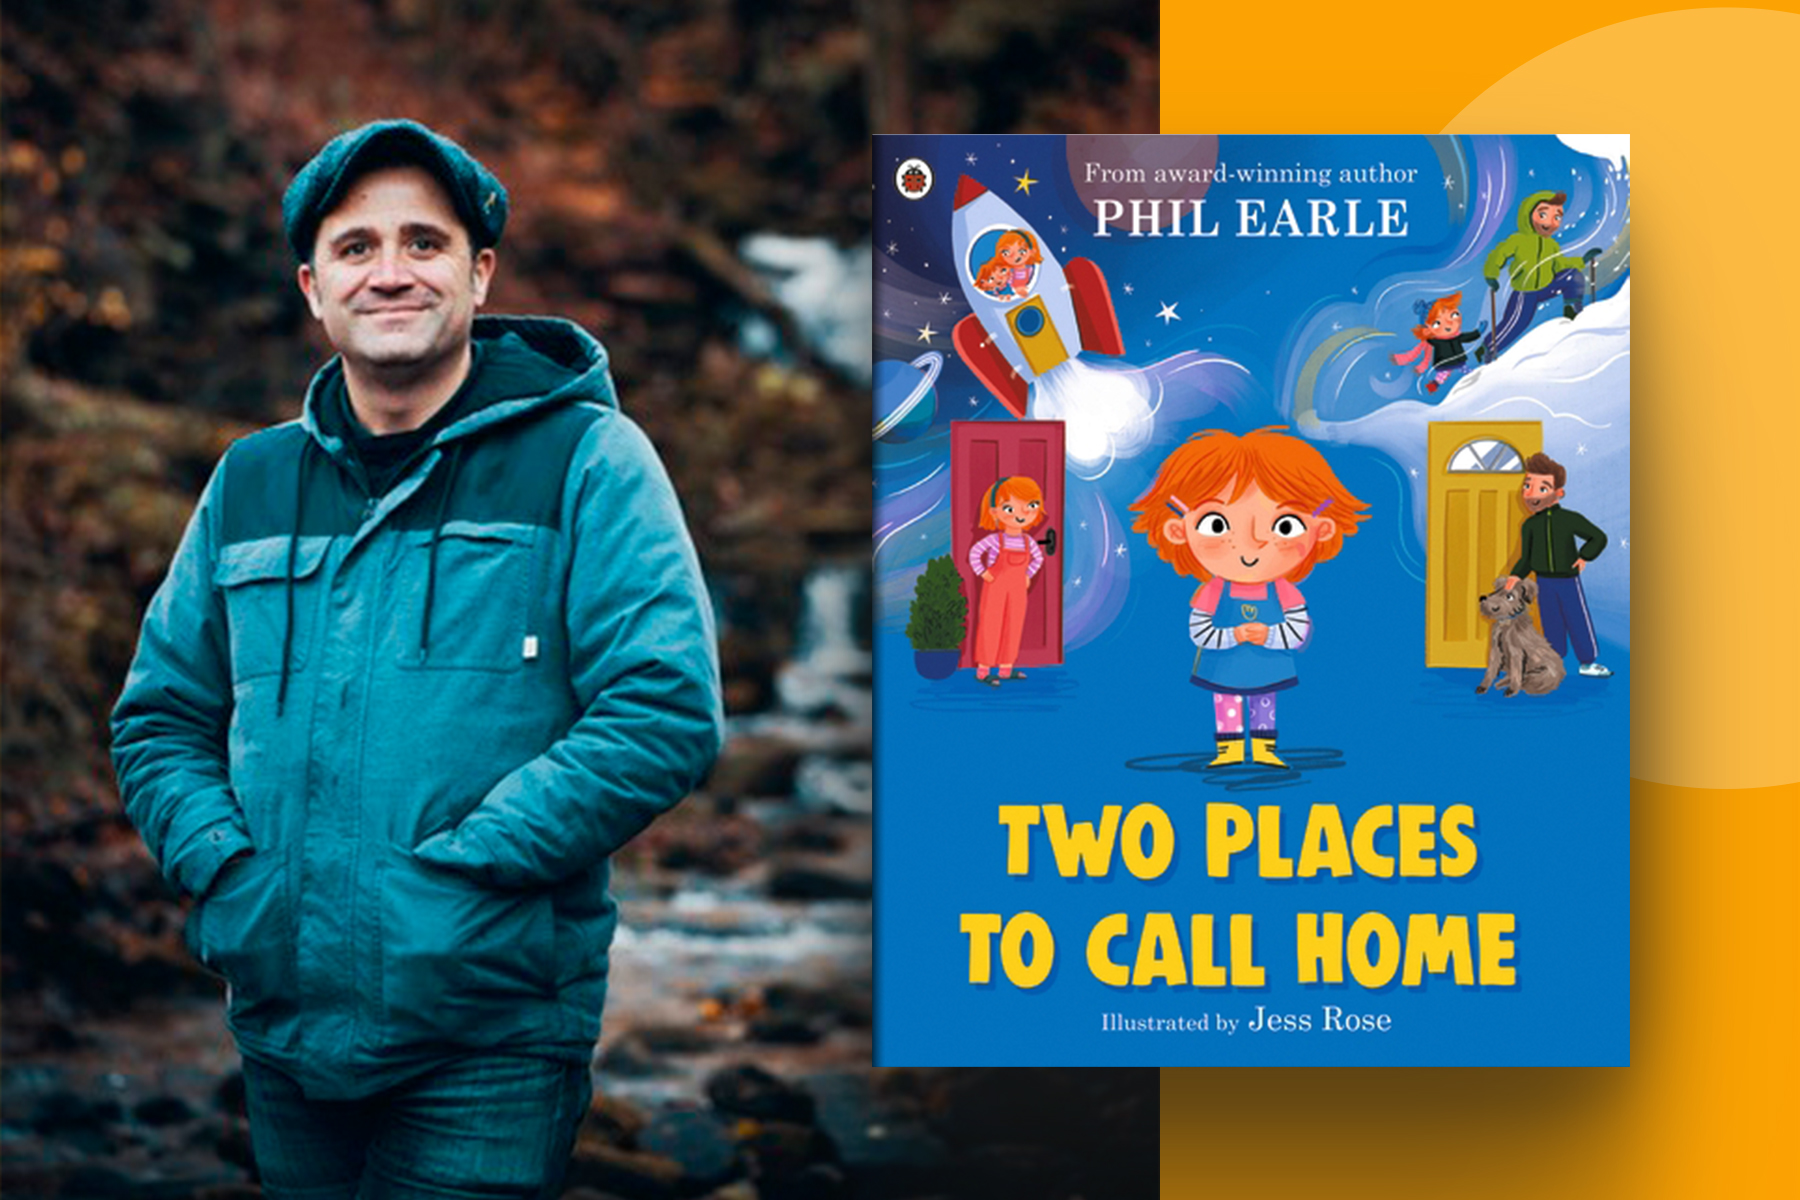 An image of author Phil Earle standing against a forest background. Next to him is the book cover of his new book Two Places to Call Home, partially on top of an orange background with a big orange spot.